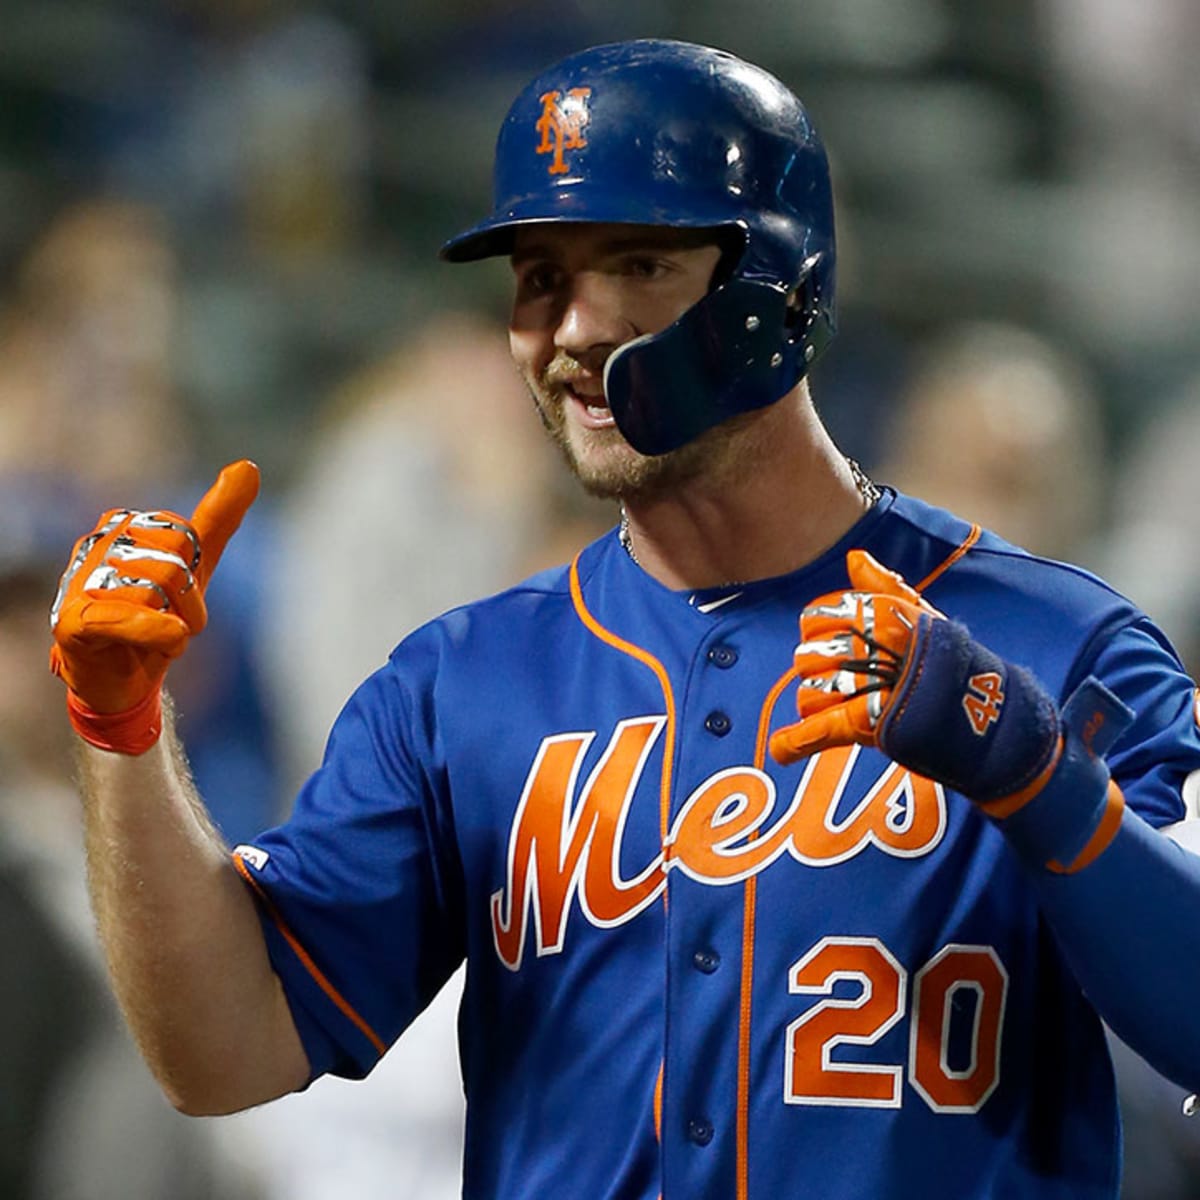 WATCH: Pete Alonso Walks It Off For New York Mets' Win Over Rockies -  Fastball